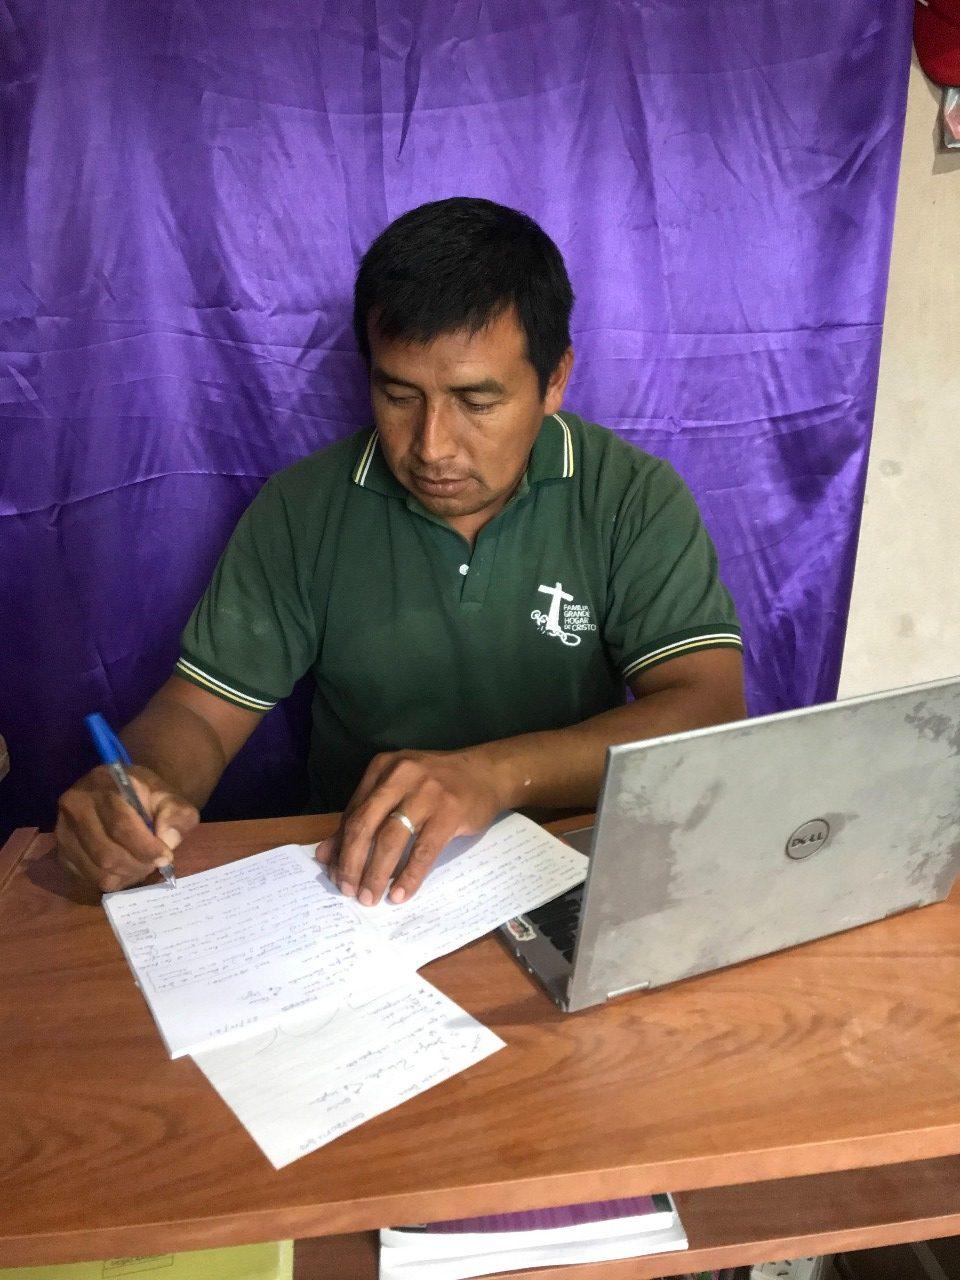 Anglican runs Catholic center ministering for indigenous in northern Argentina